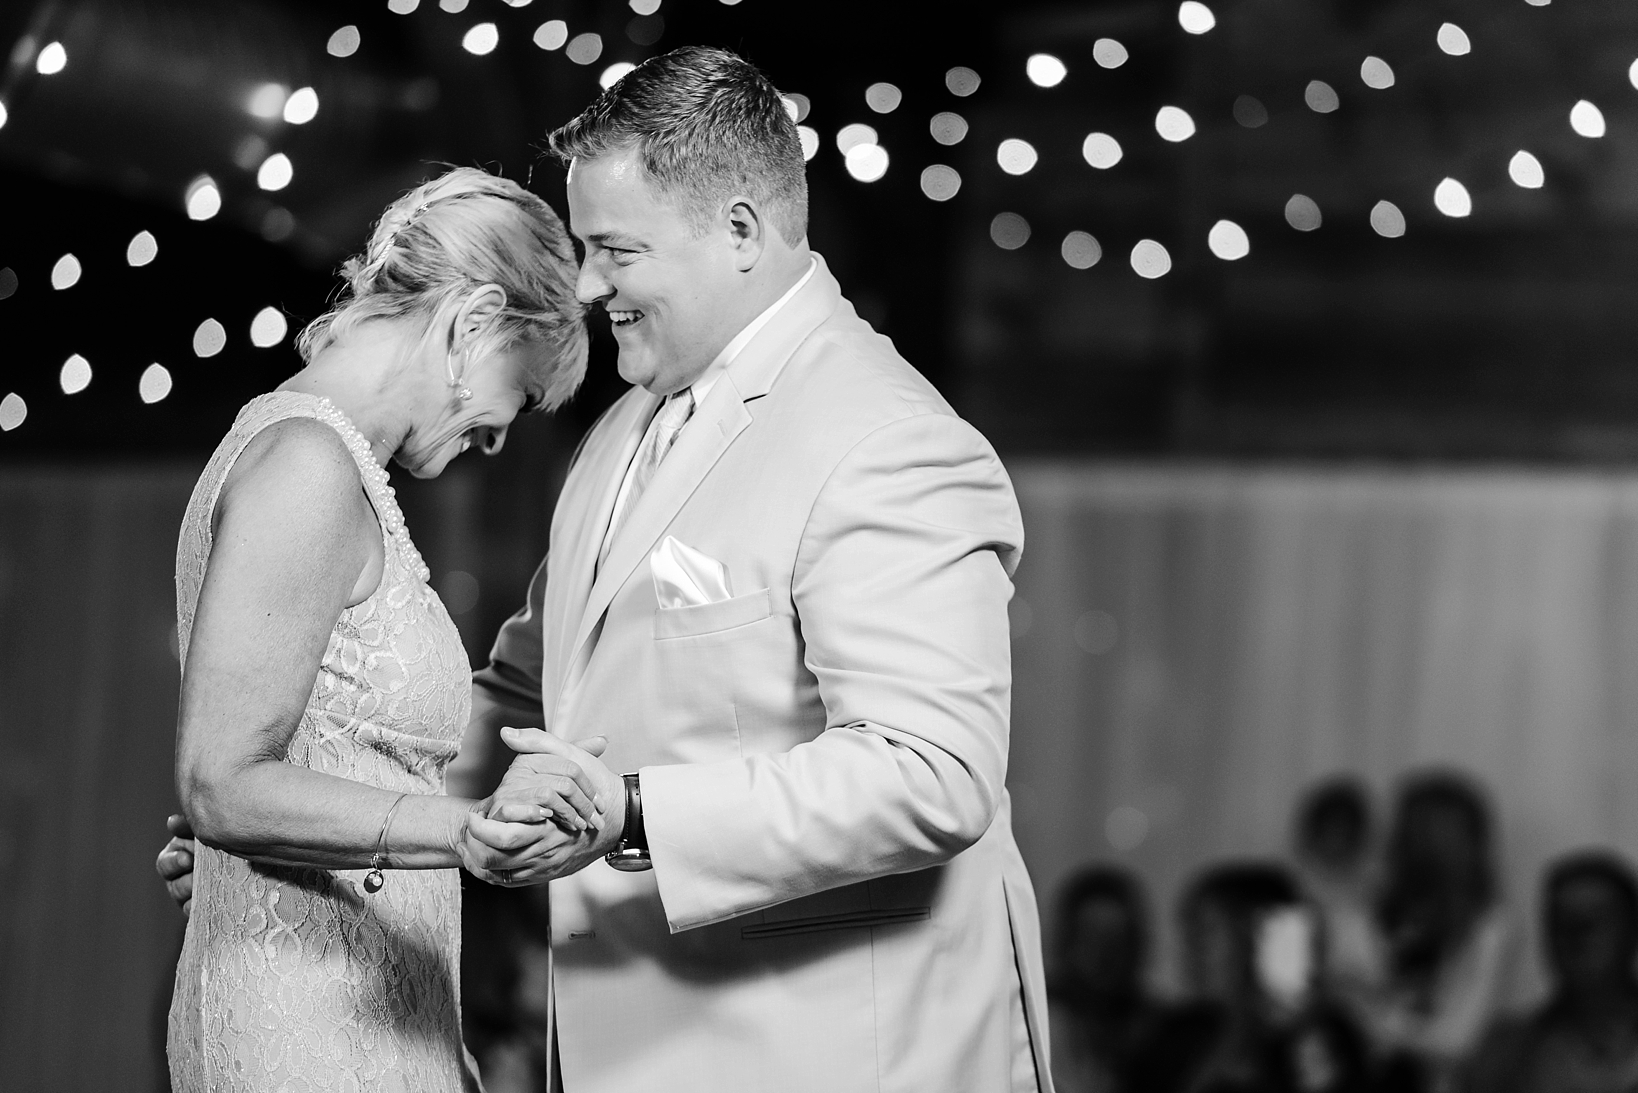 Mother Son dance in black and white with string lights in the background during the cross creek ranch reception